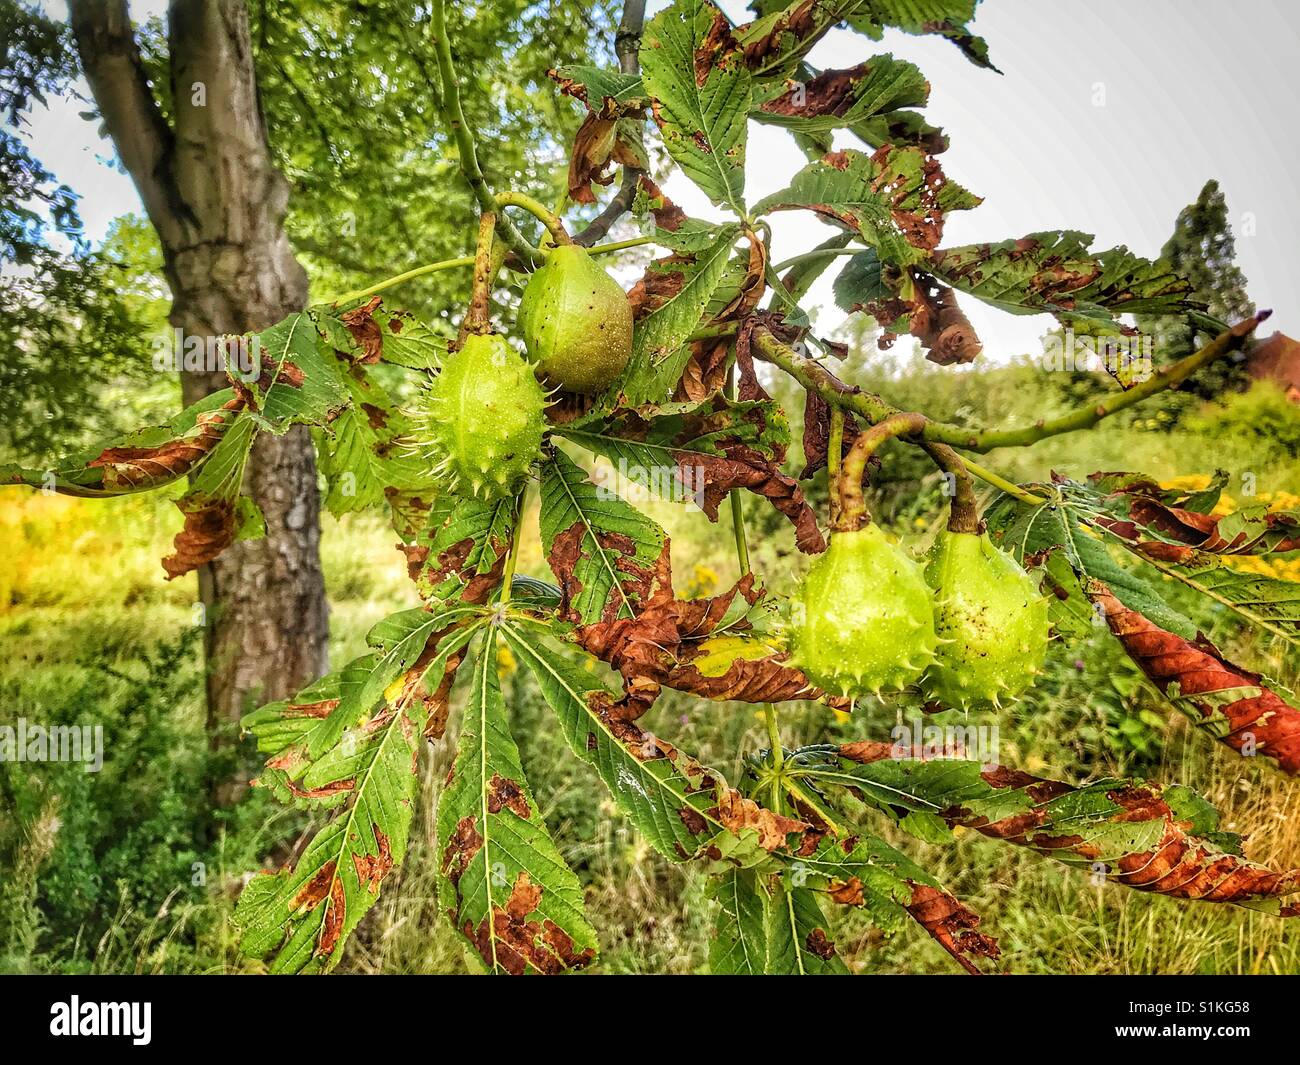 A group of conkers hanging from a tree in late July Stock Photo